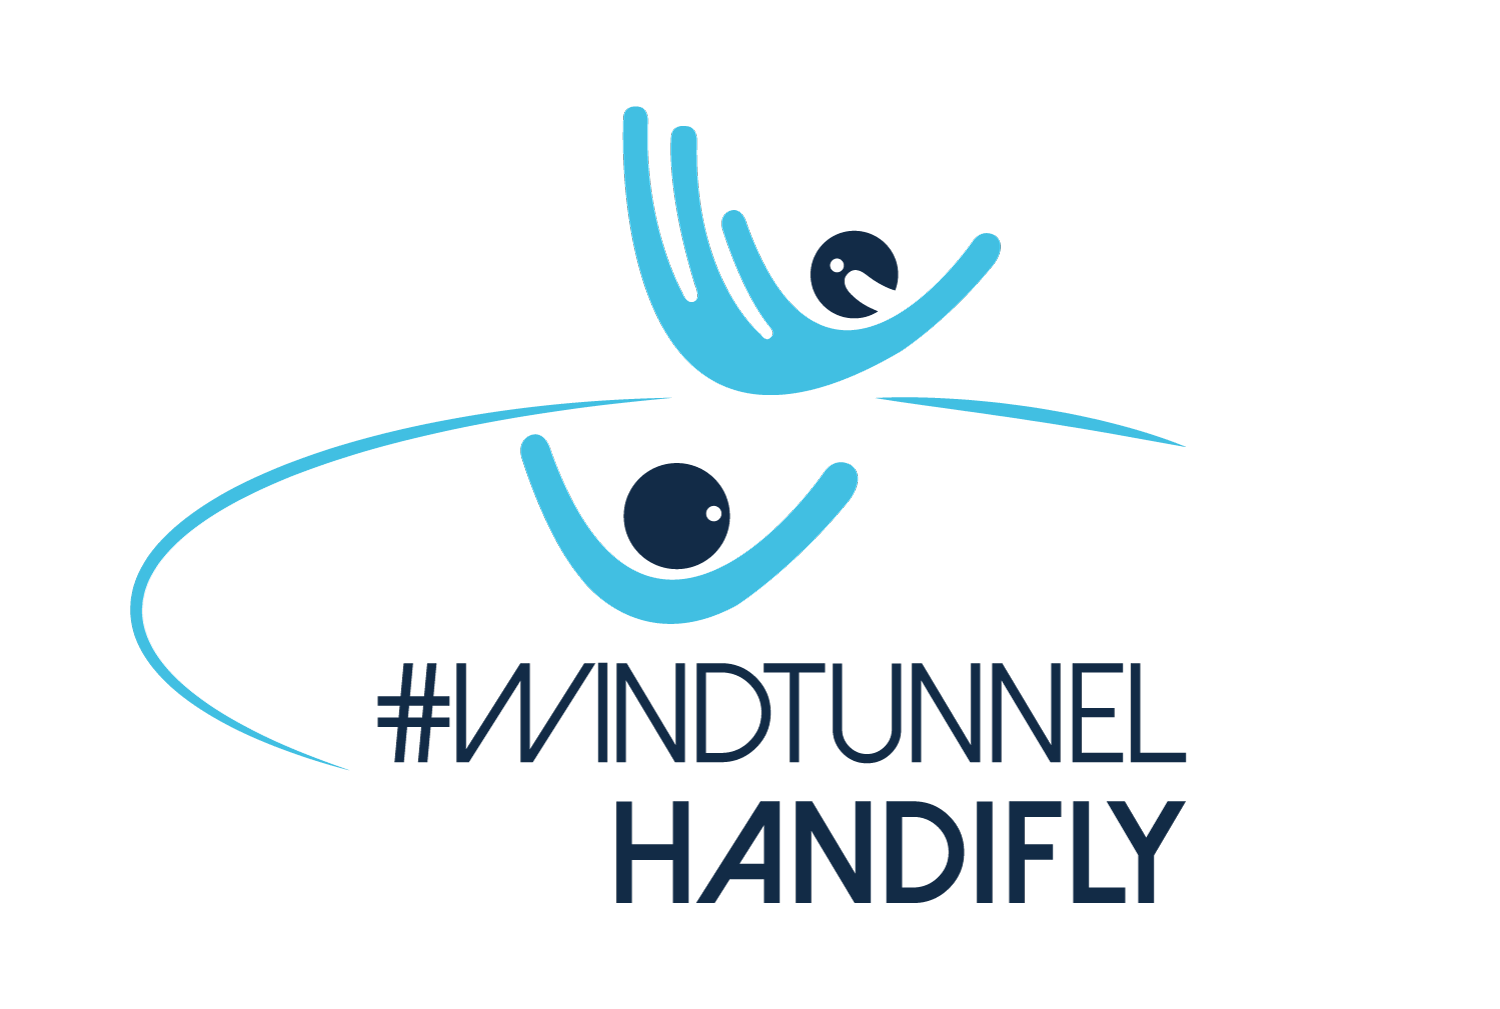 Windtunnel HandiFly 2021 | Reporting